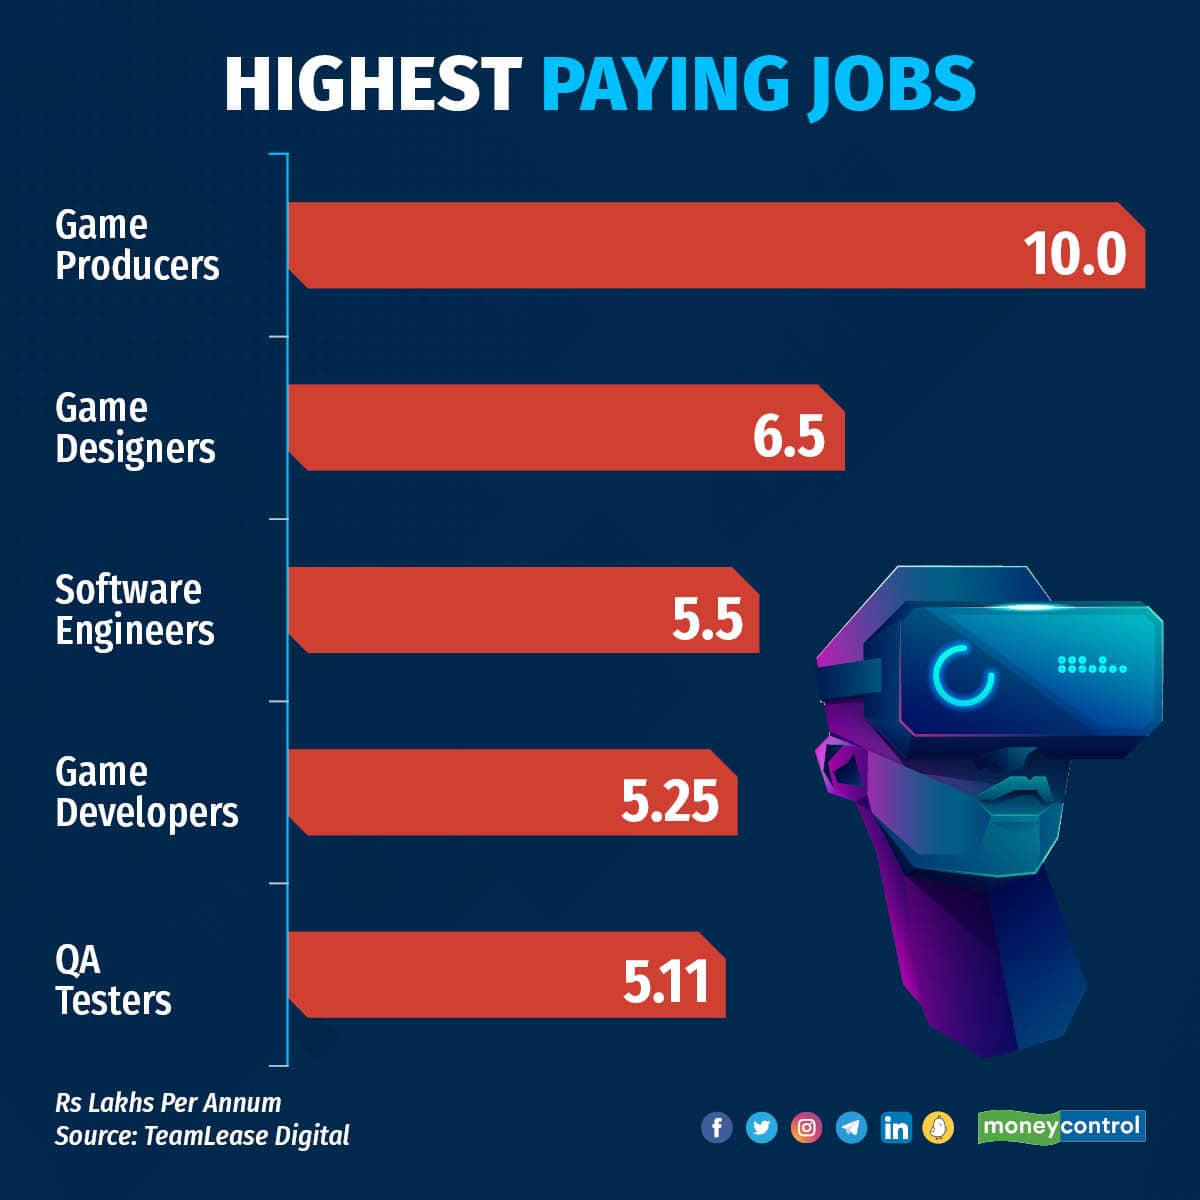 Gaming industry is booming, here are the jobs that are in demand